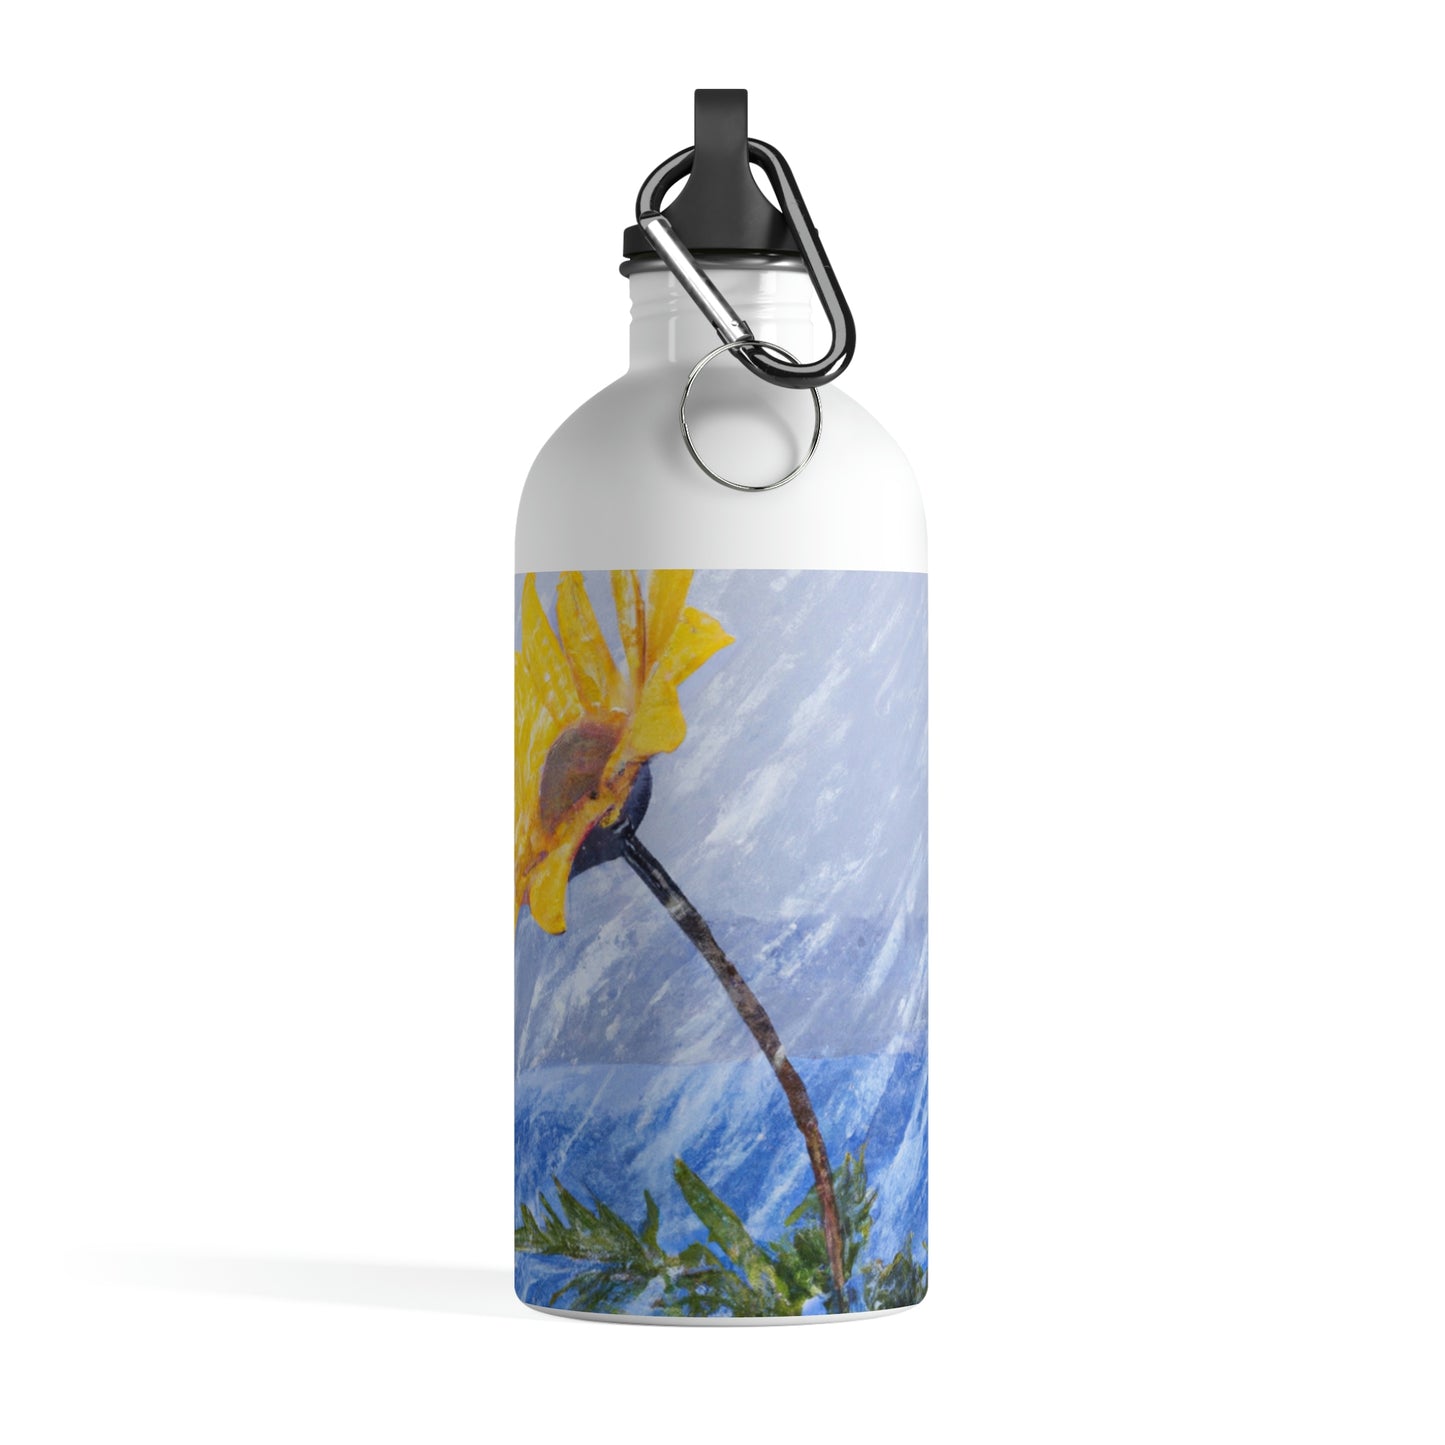 "A Burst of Color in the Glistening White: The Miracle of a Flower Blooms in a Snowstorm" - The Alien Stainless Steel Water Bottle